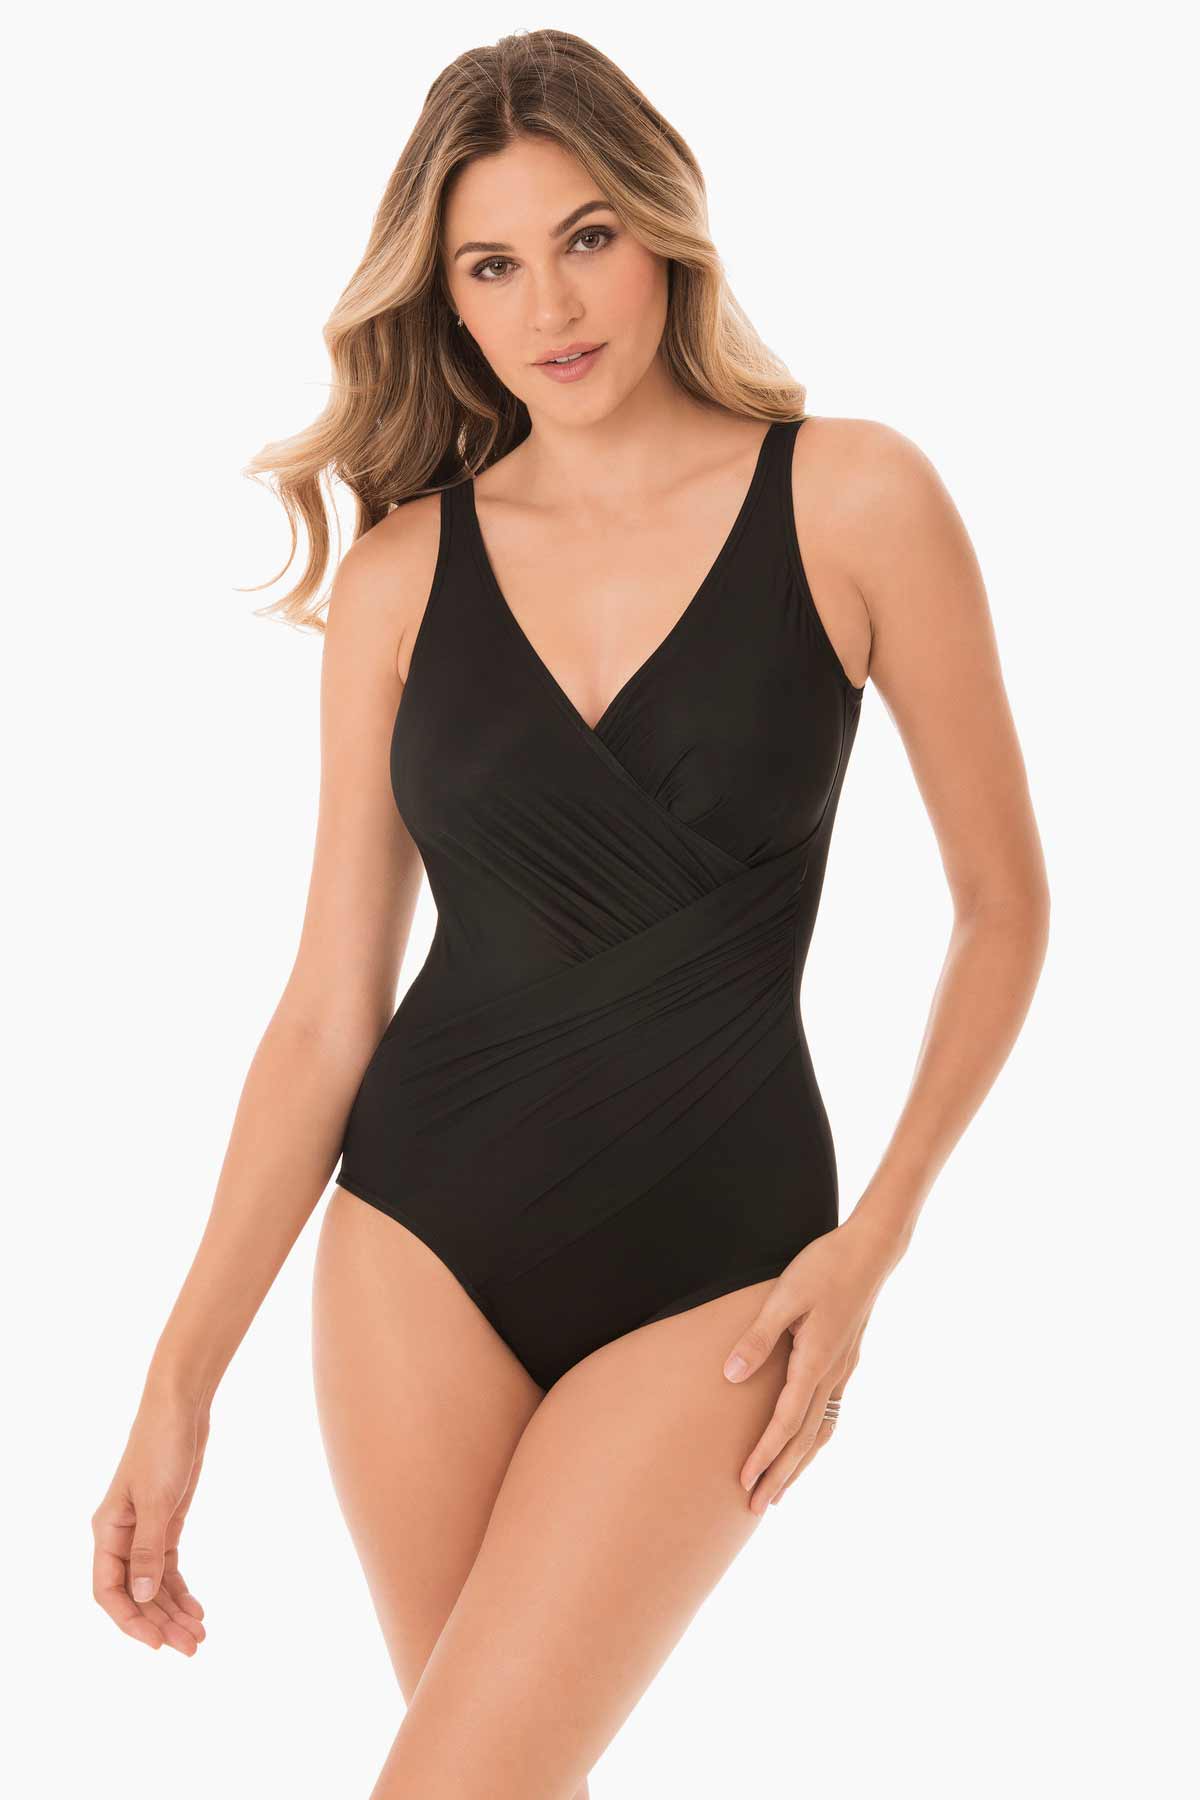 I wore this ultra-flattering Spanx swimsuit in Italy and got tons